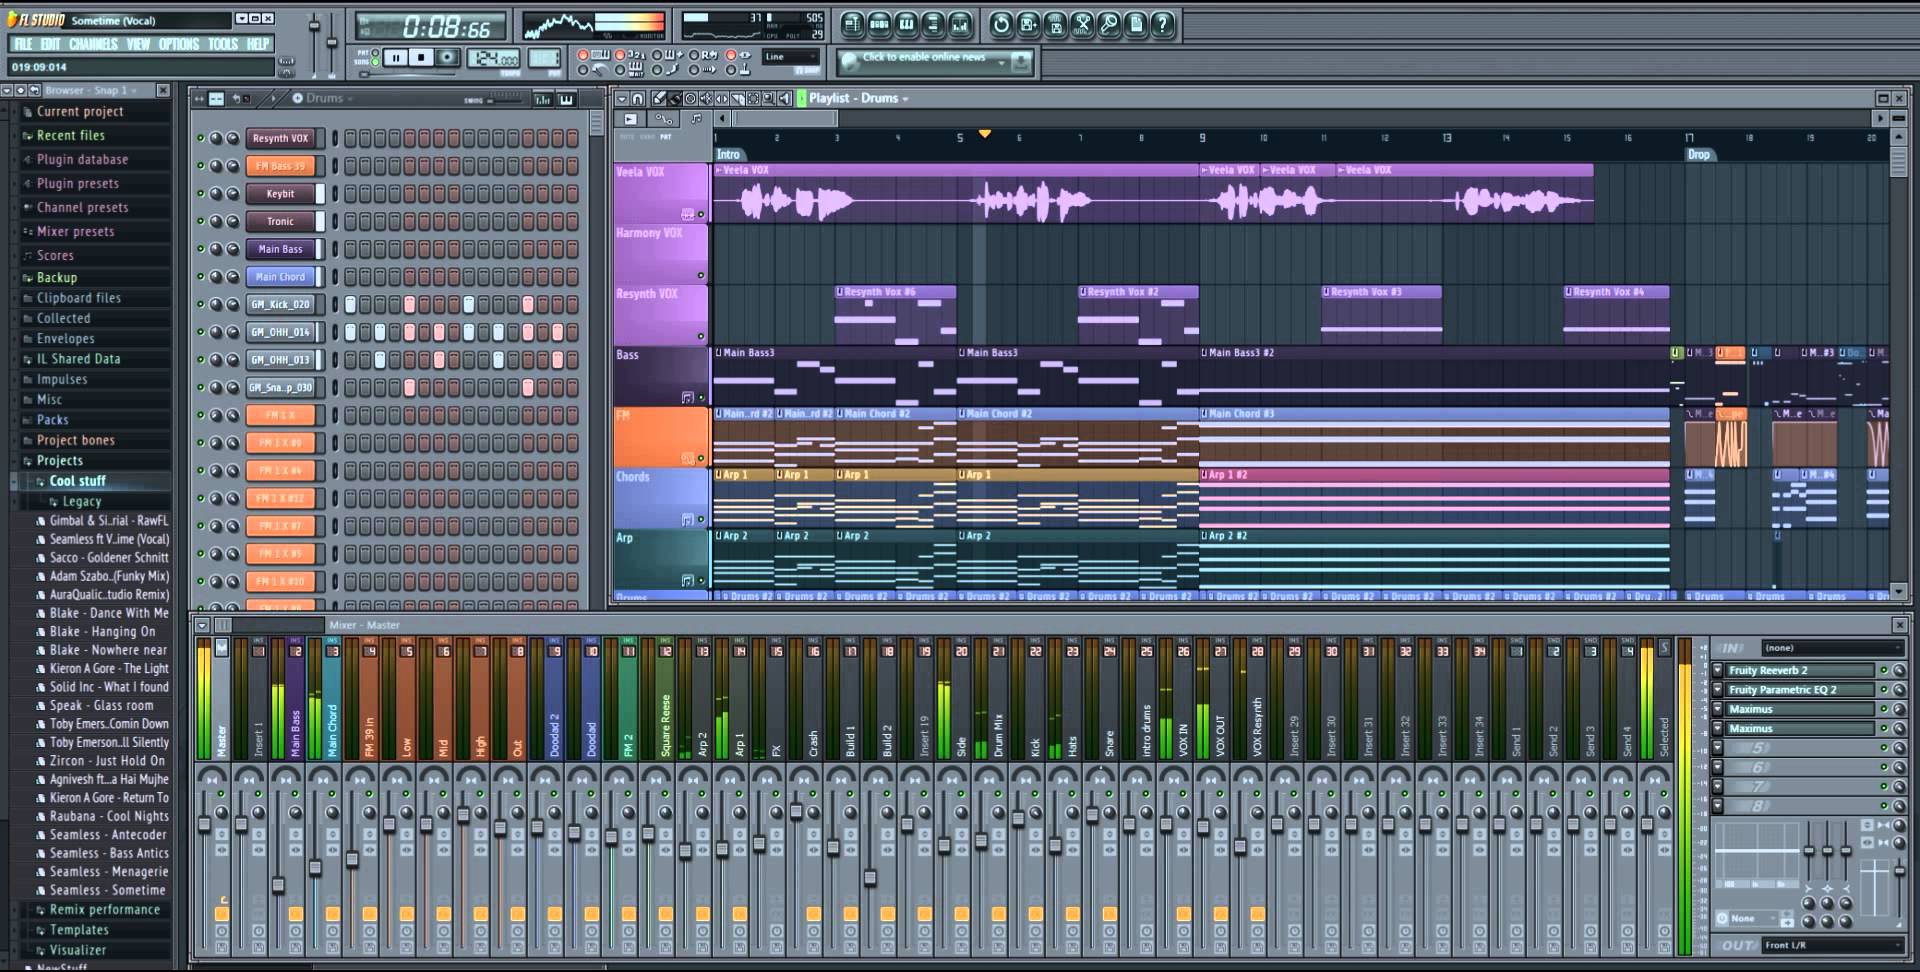 how to sample a song in fl studio